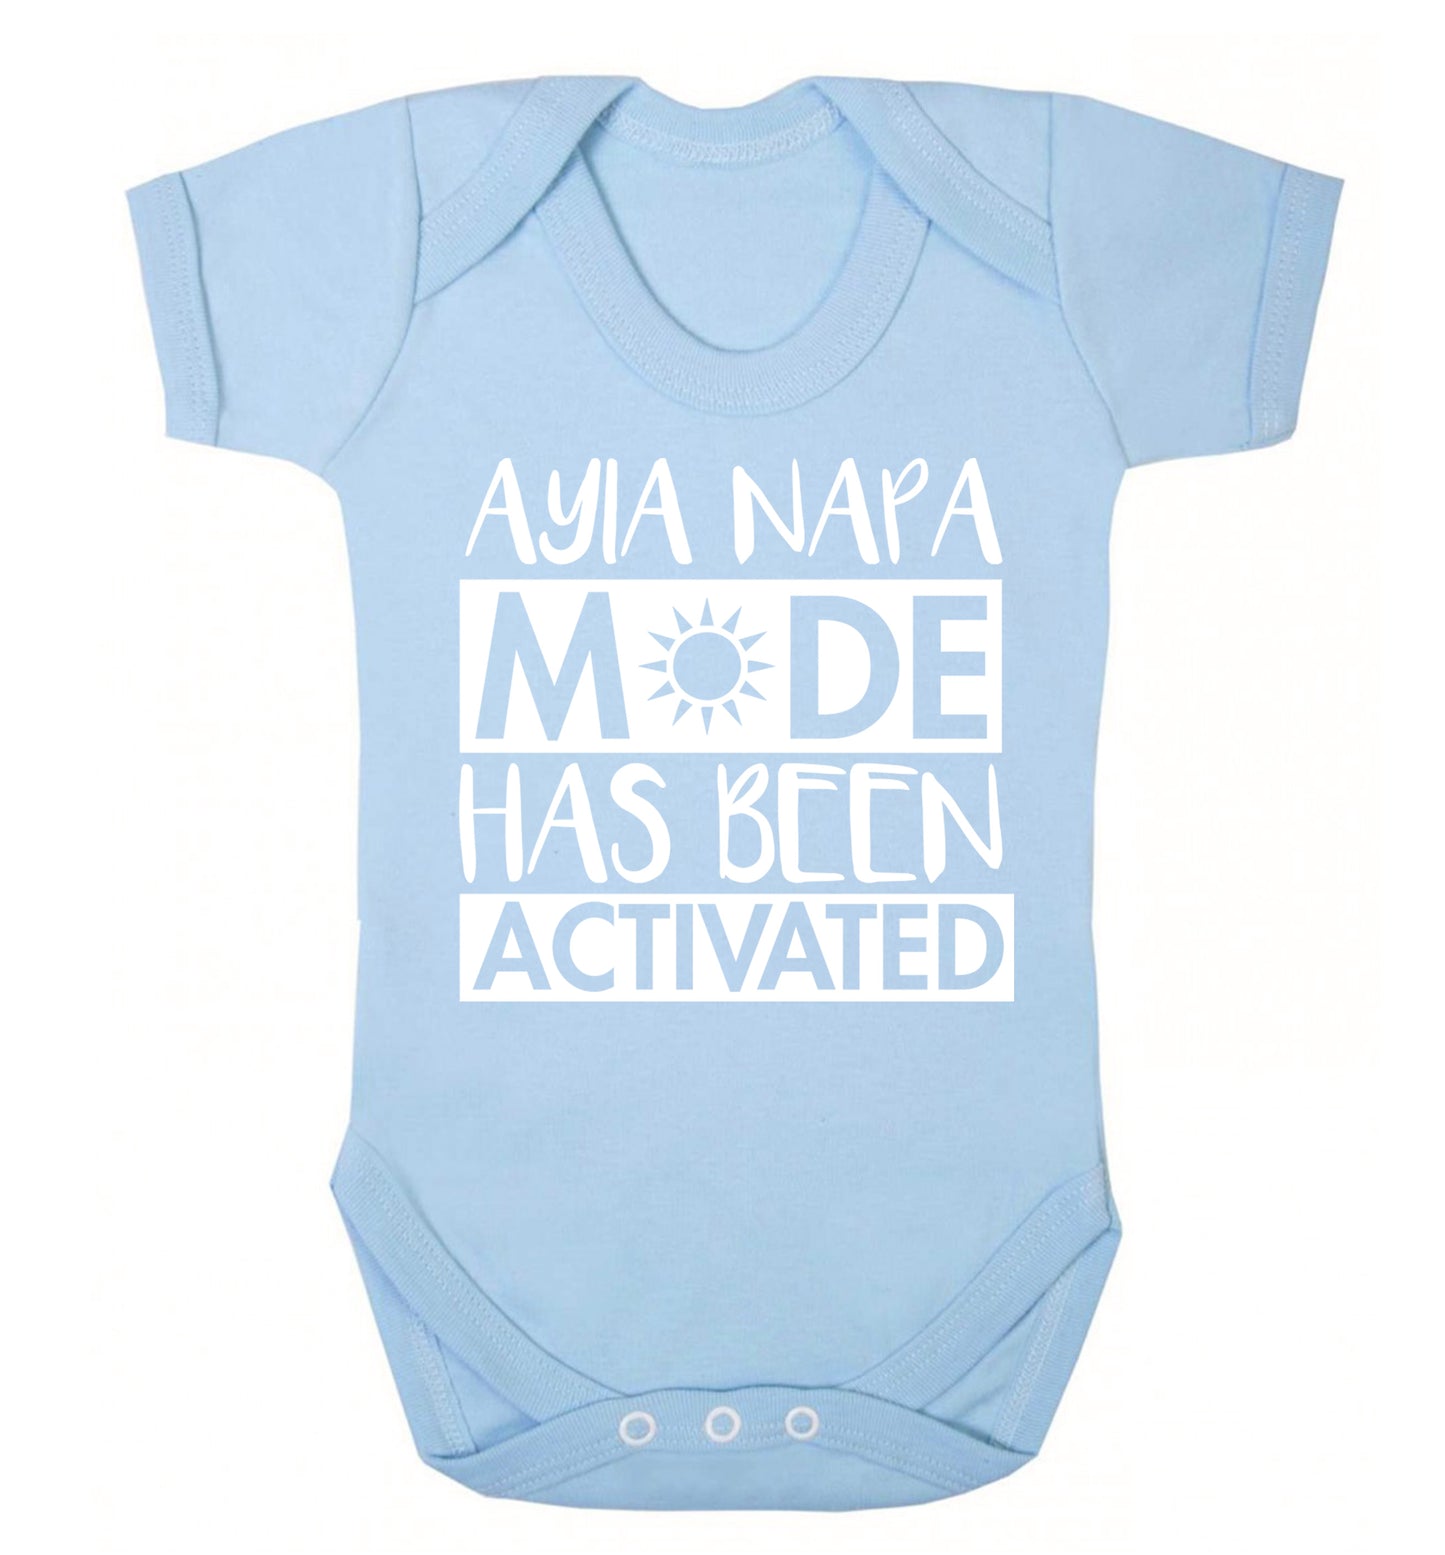 Ayia Napa mode has been activated Baby Vest pale blue 18-24 months